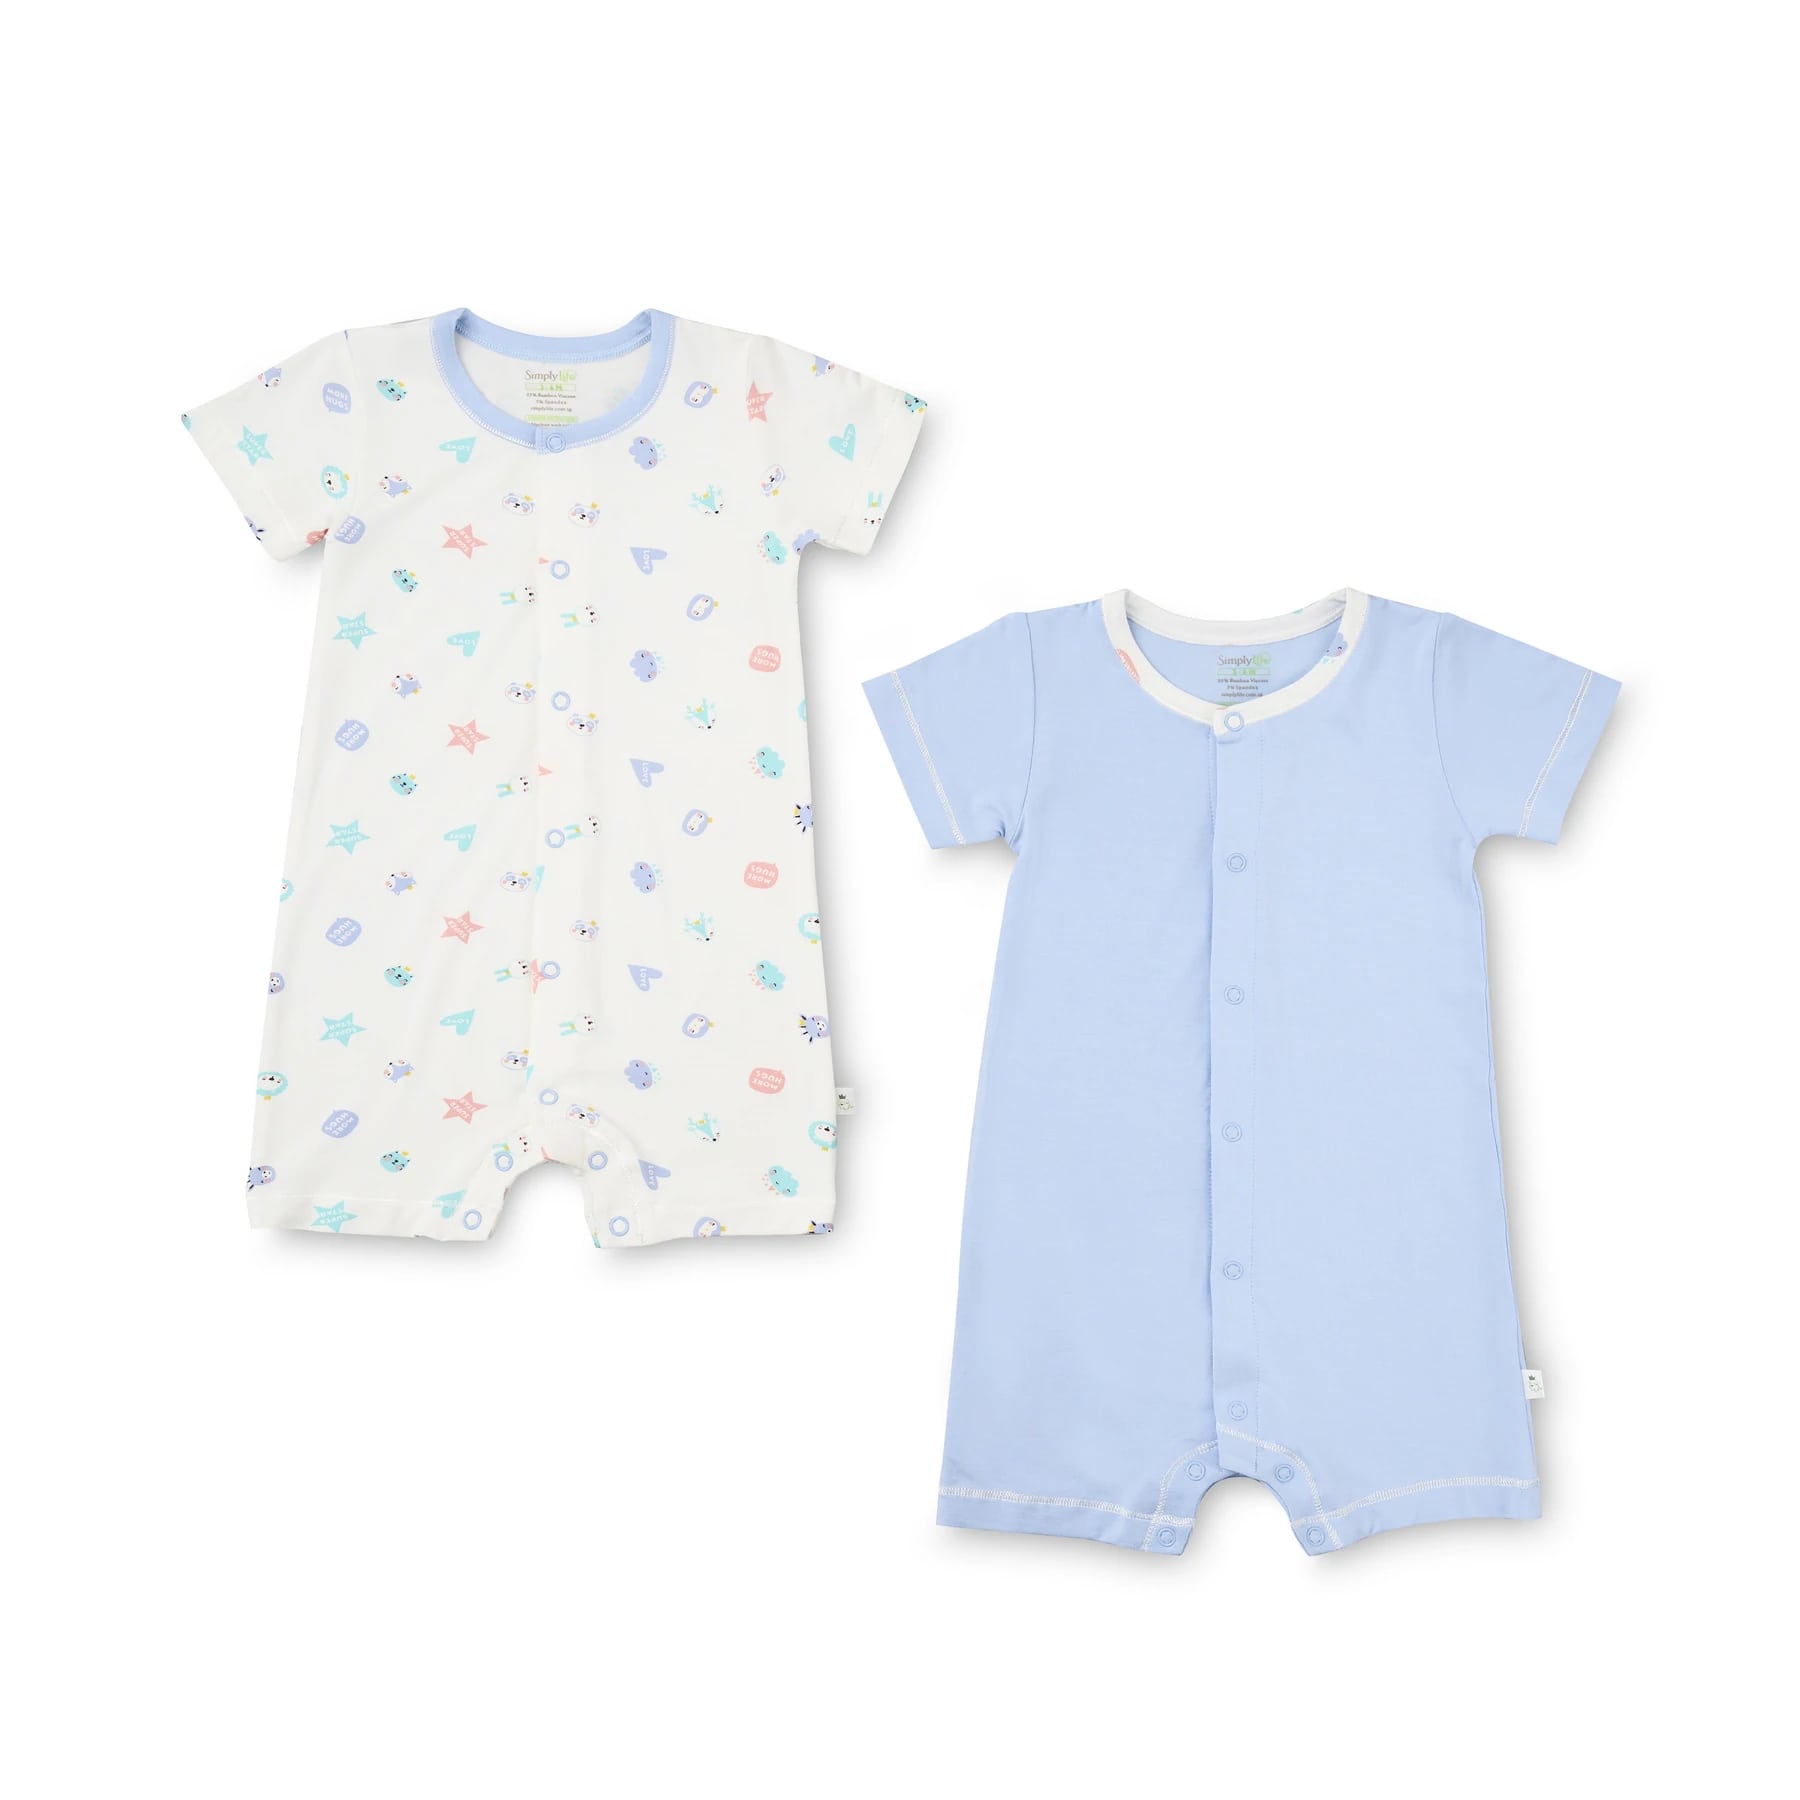 Simply Life Bamboo Shortall S/S front snap button 2pcs - Superstar & Blue (SLWR-19SUBL2)